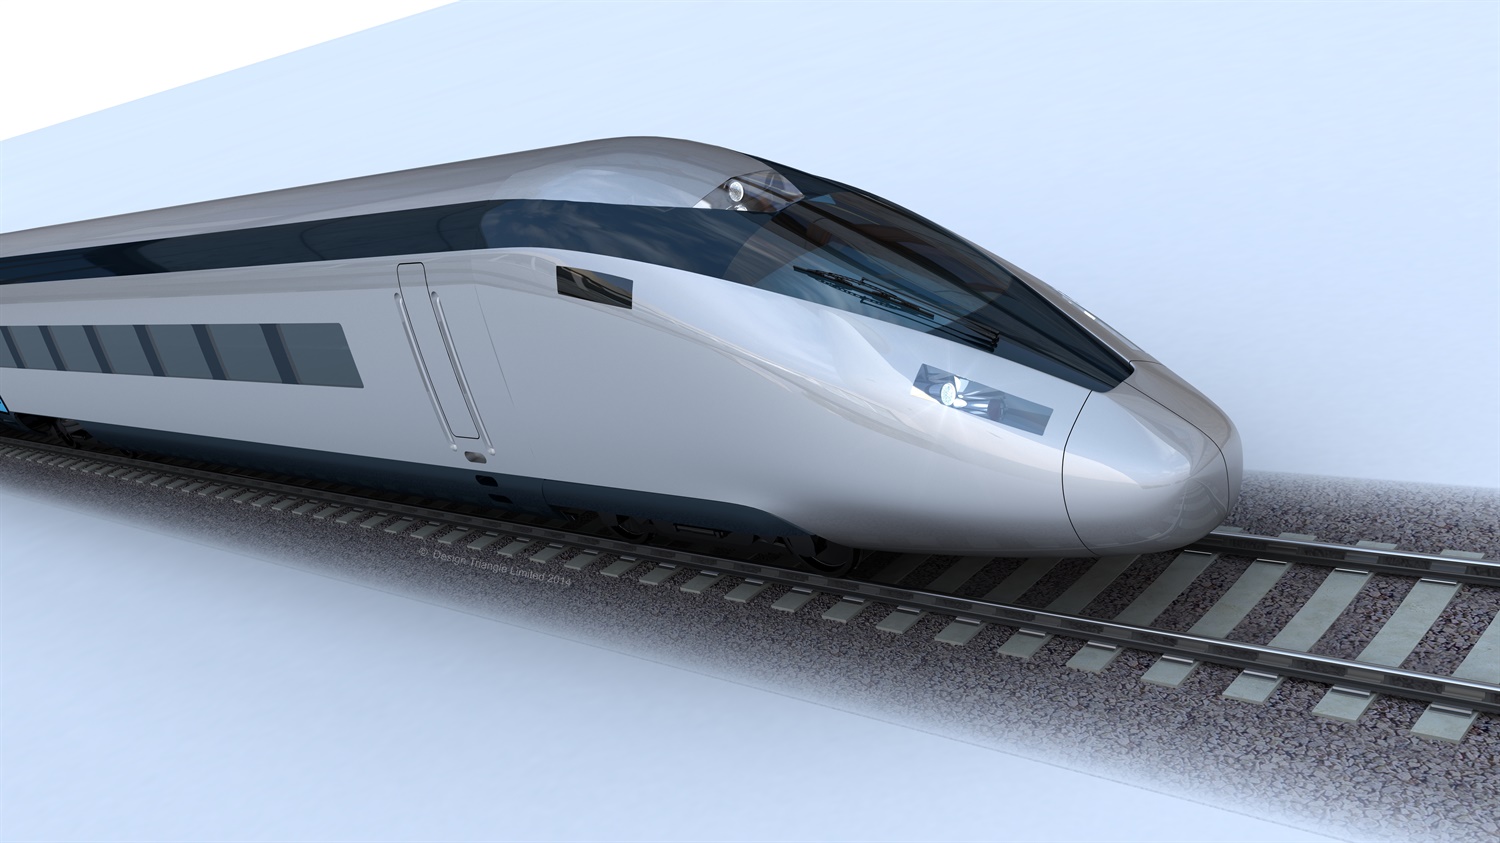 HS2 Bill expected to pass final reading in House of Commons today